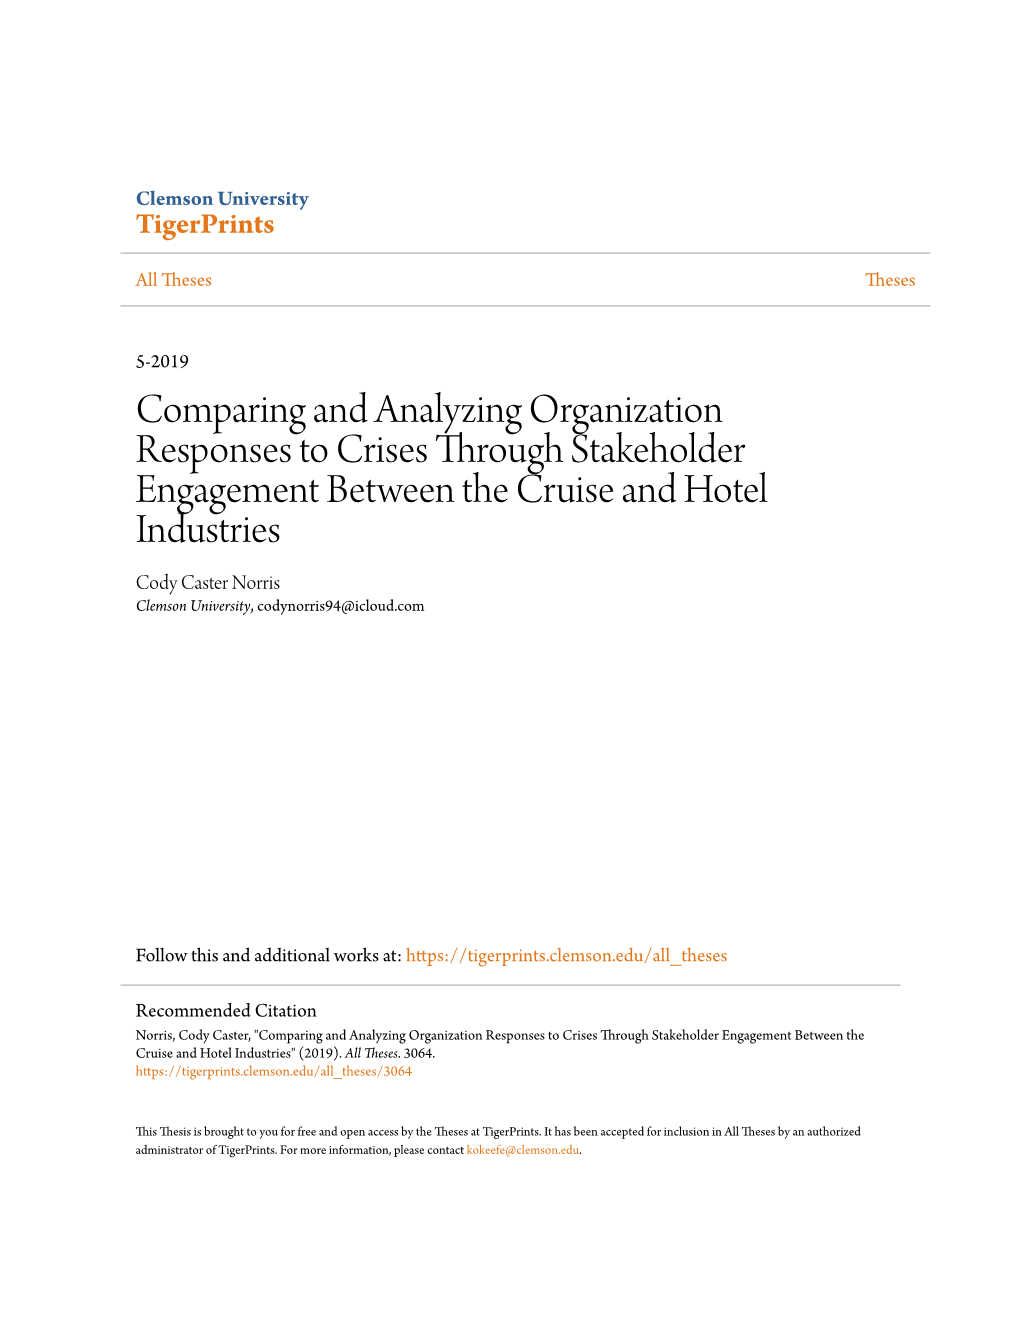 Comparing and Analyzing Organization Responses to Crises